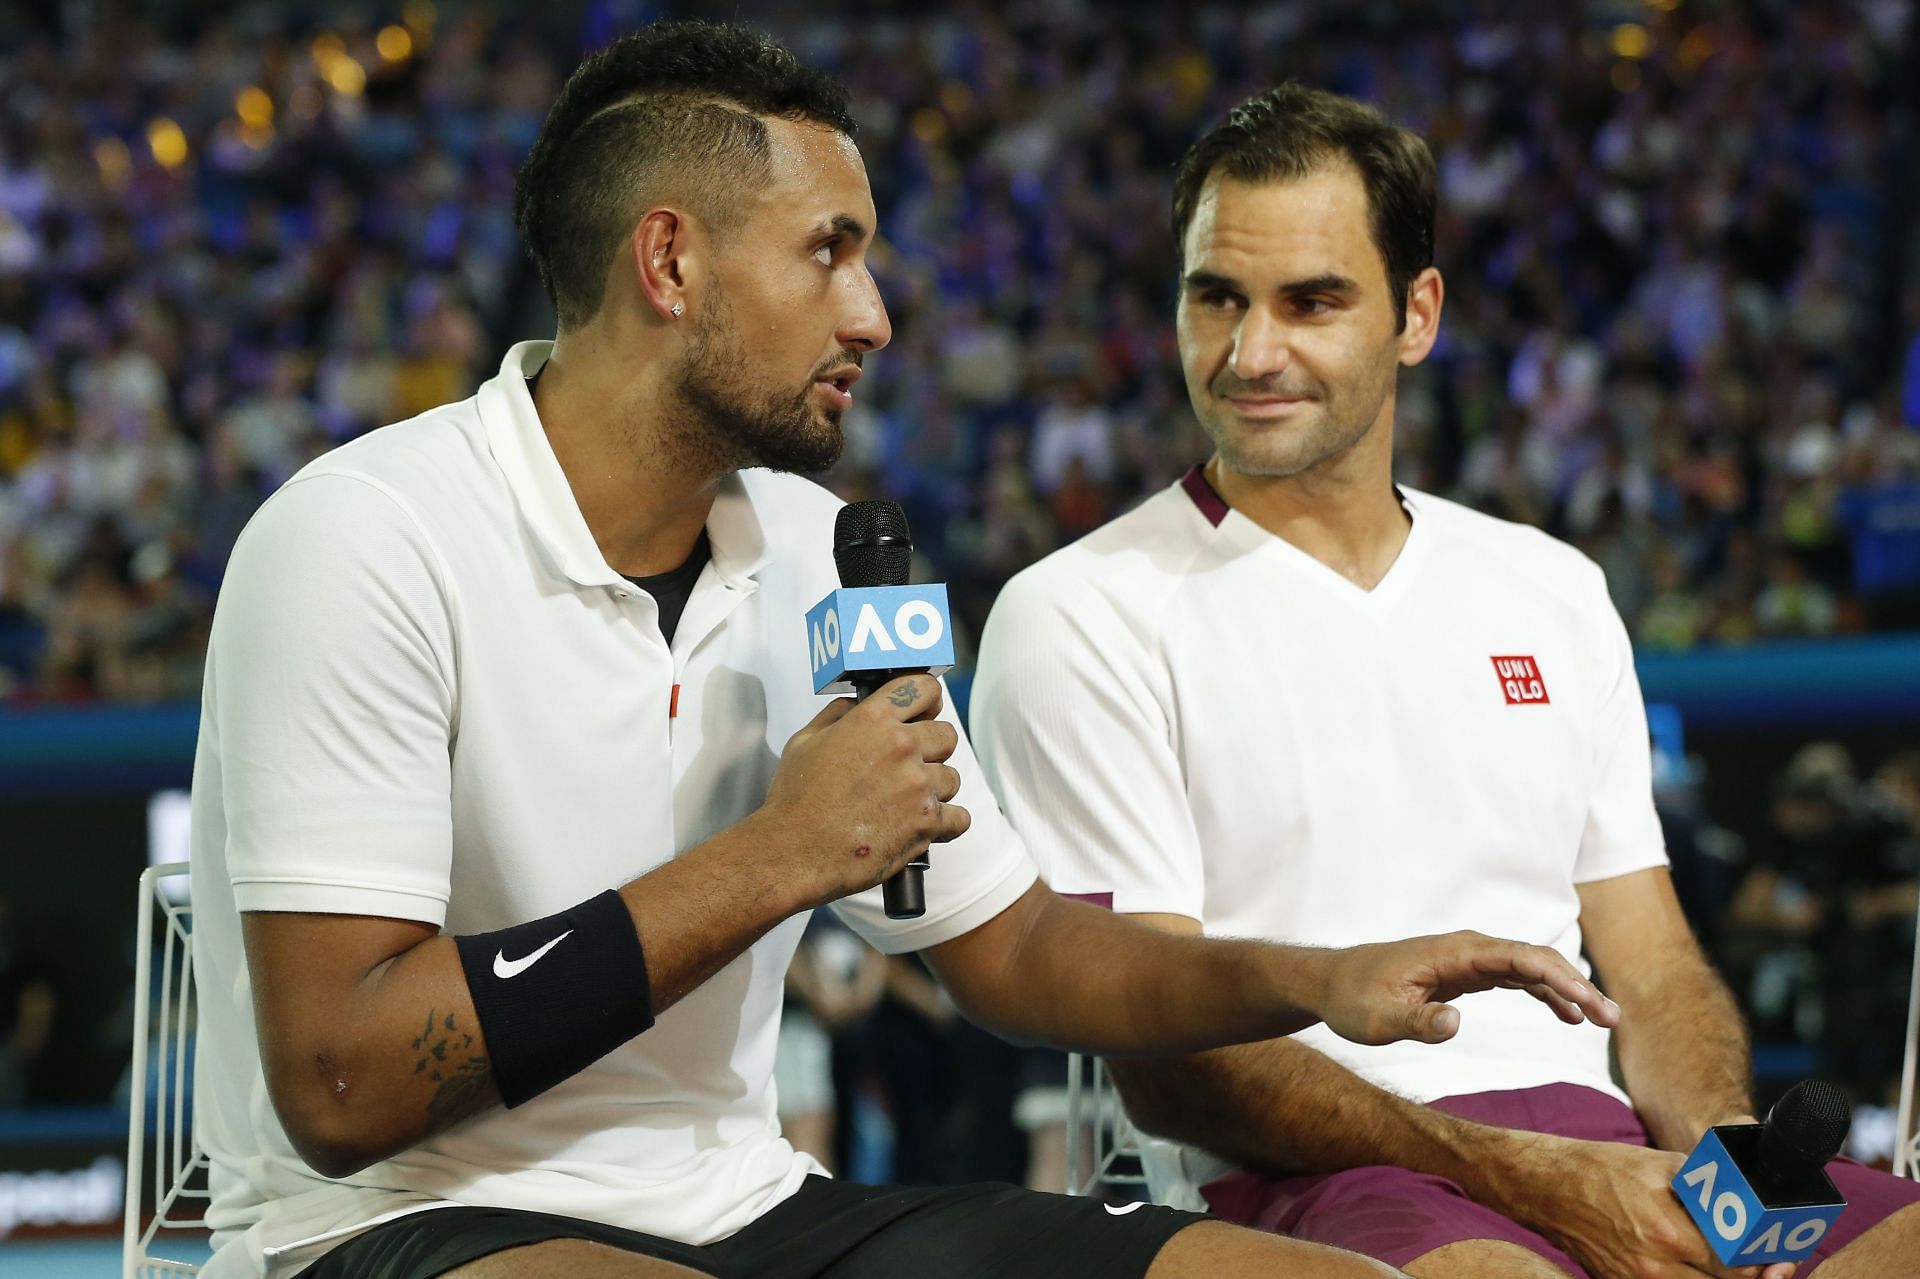 &lt;a href=&#039;https://www.sportskeeda.com/player/nick-kyrgios&#039; target=&#039;_blank&#039; rel=&#039;noopener noreferrer&#039;&gt;Nick Kyrgios&lt;/a&gt; and &lt;a href=&#039;https://www.sportskeeda.com/player/roger-federer&#039; target=&#039;_blank&#039; rel=&#039;noopener noreferrer&#039;&gt;Roger Federer&lt;/a&gt; at the Tennis Rally for Relief event in Melbourne, Australia